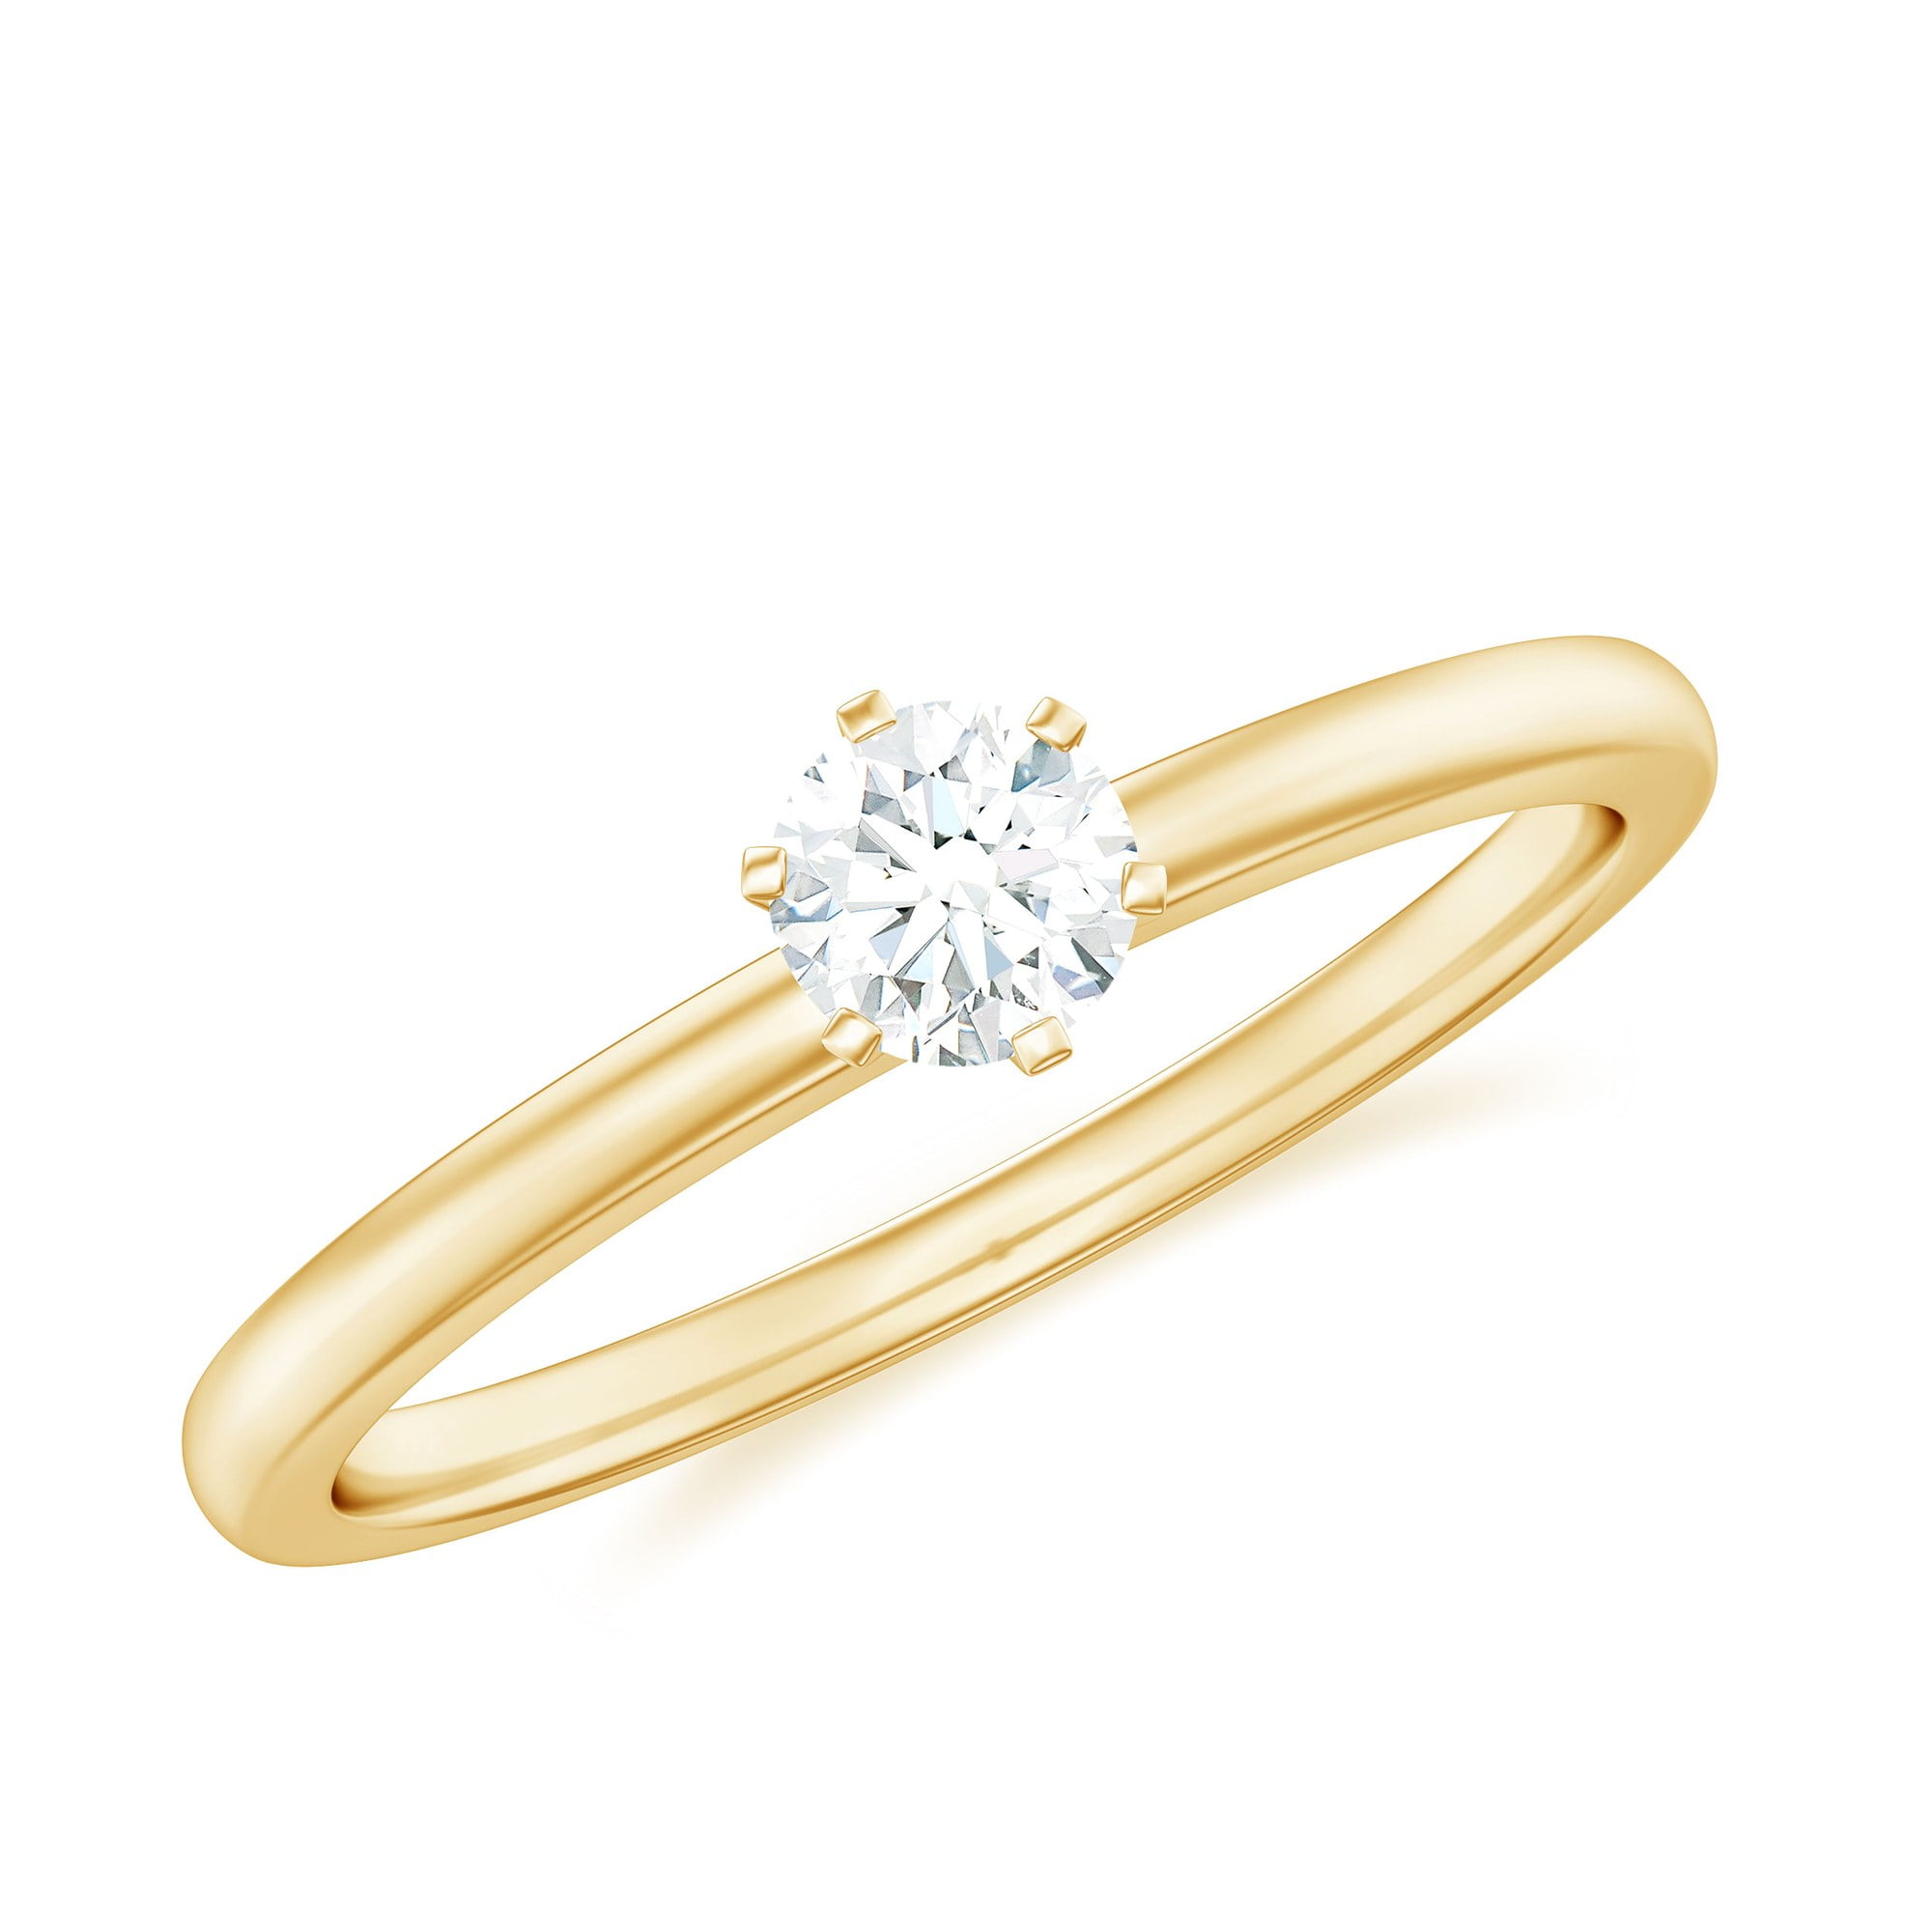 Round CZ Ring 14K Solid Yellow Gold Cubic Zirconia Solitaire Engagement 6 Prong CZ, 1/2 , 3/4, or 1 Carat Bridal Simple Promise 1/2 Carat (5.0 mm) /